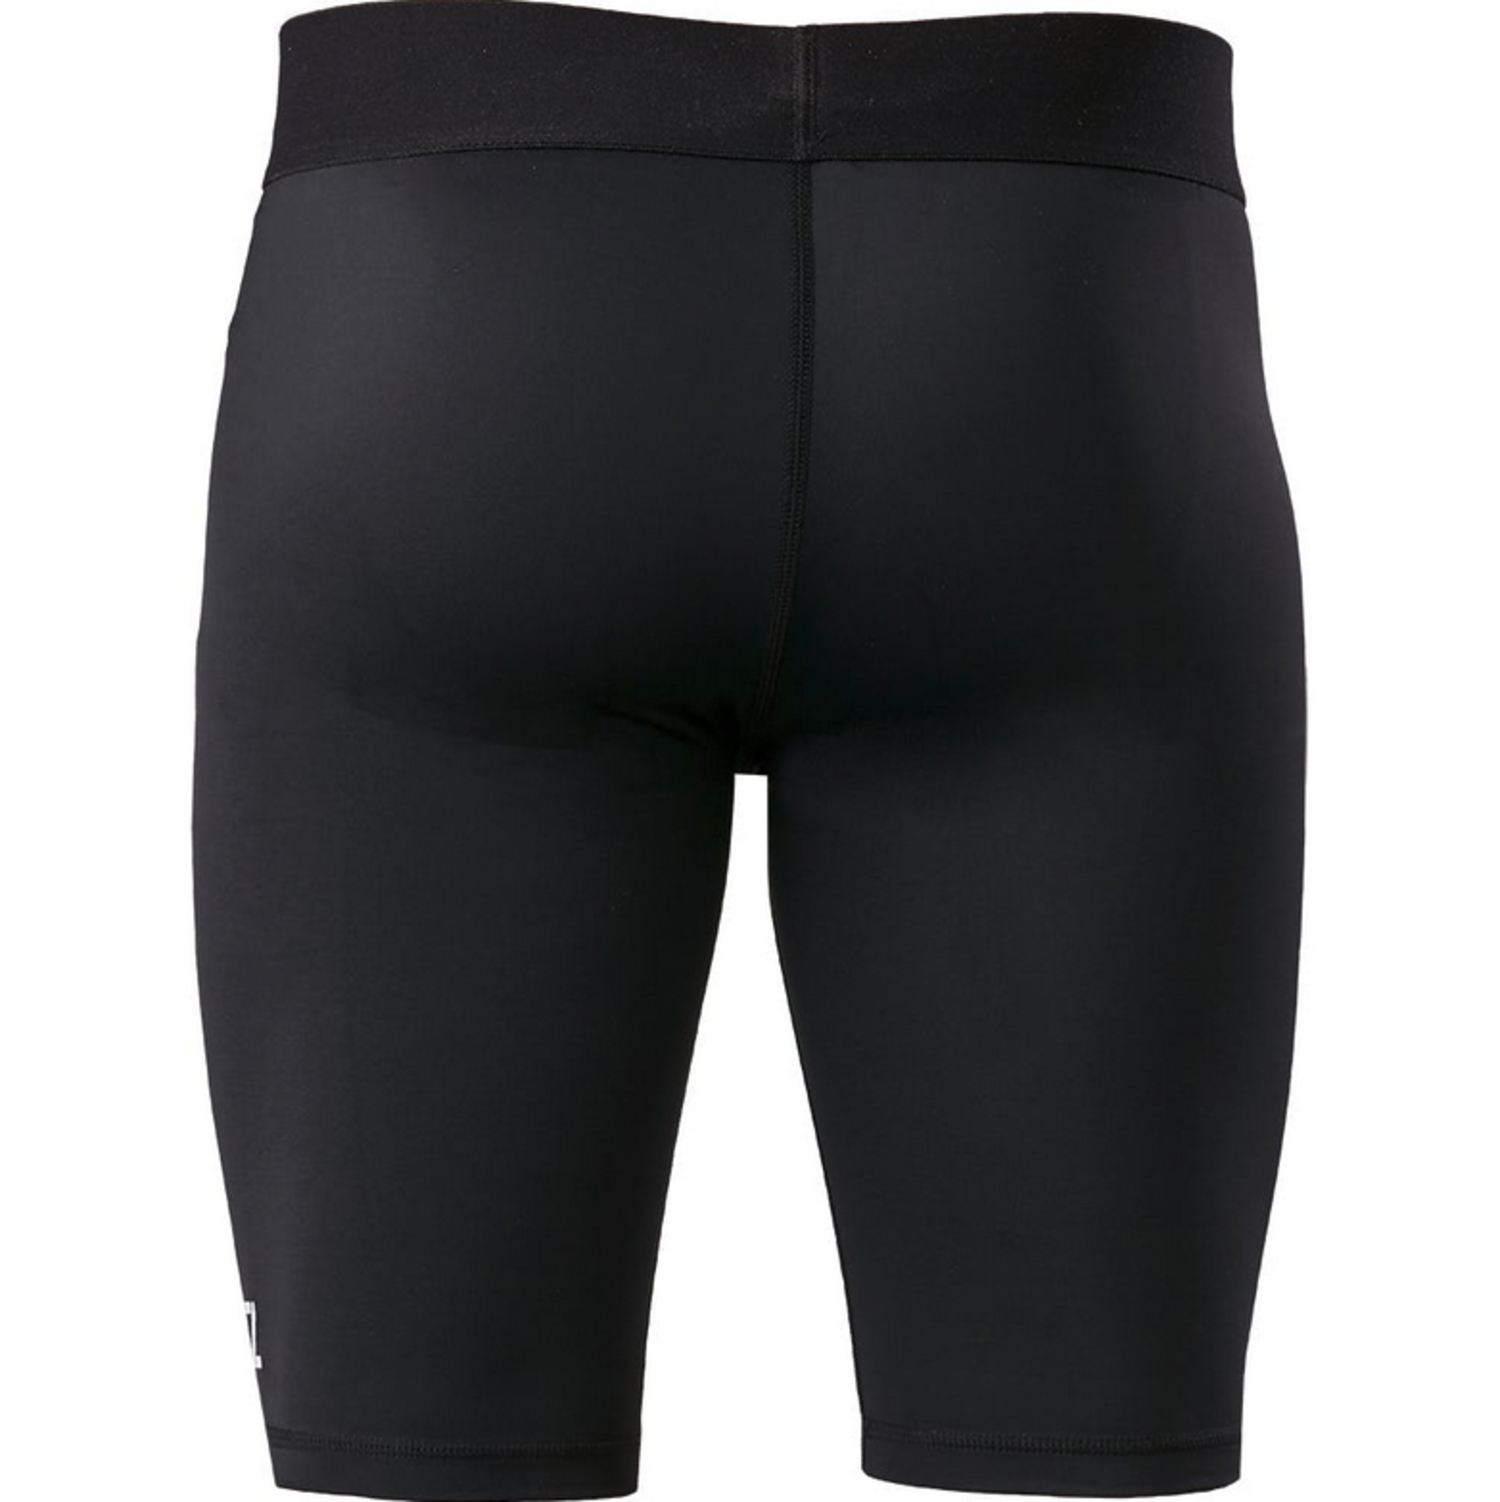 Compression Shorts With Groin Guard Cup - Enso Martial Arts Shop Bristol